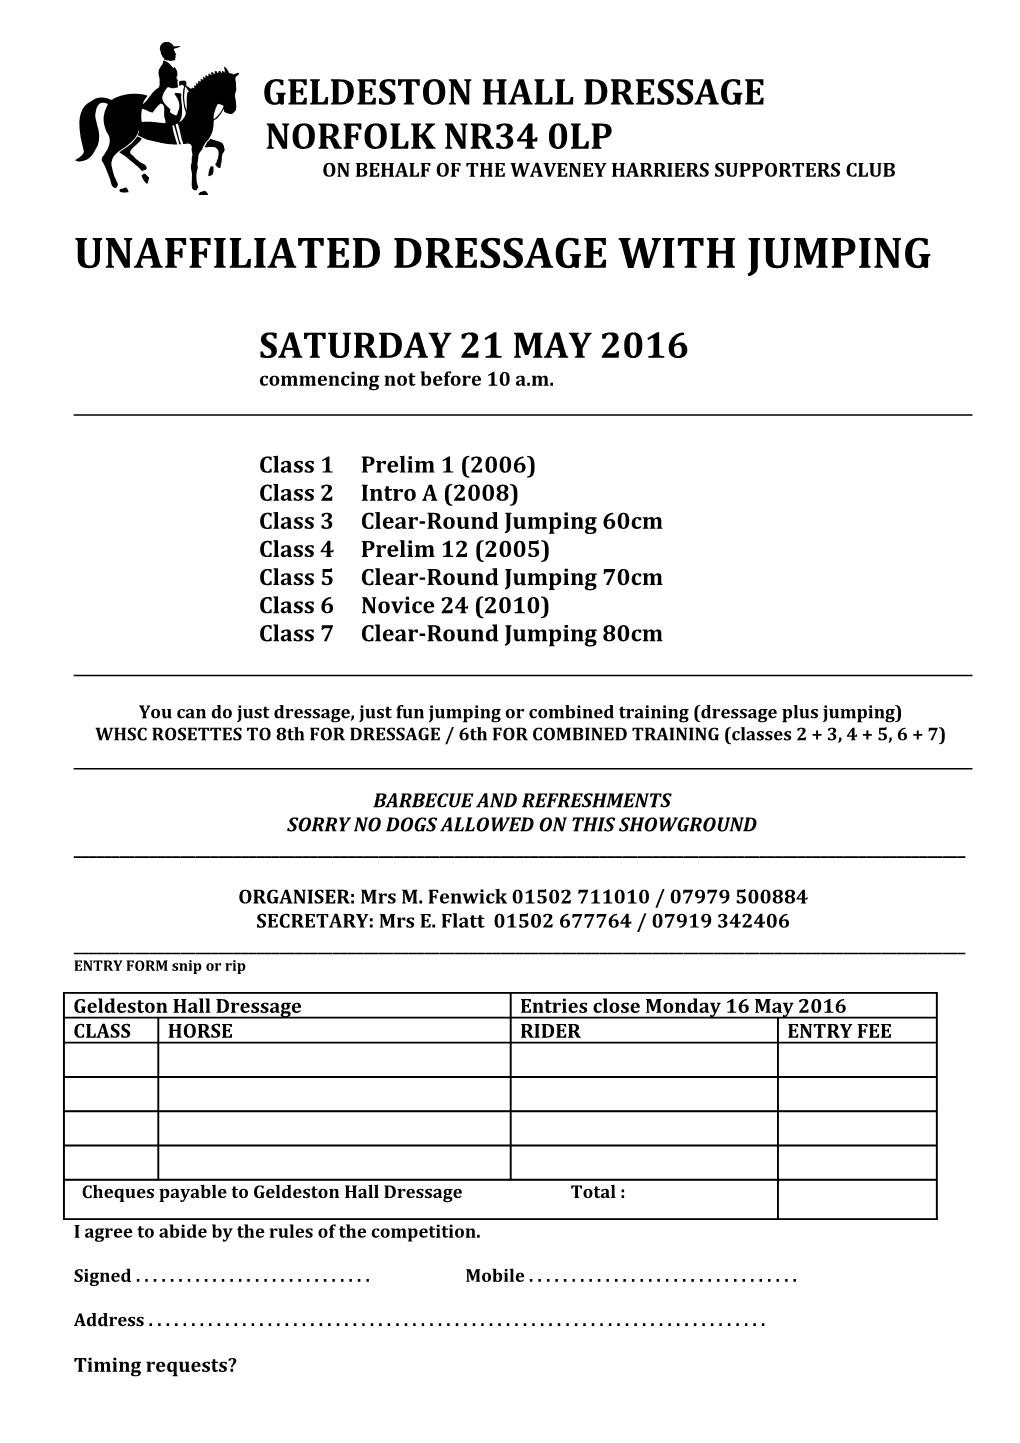 Unaffiliated Dressage At